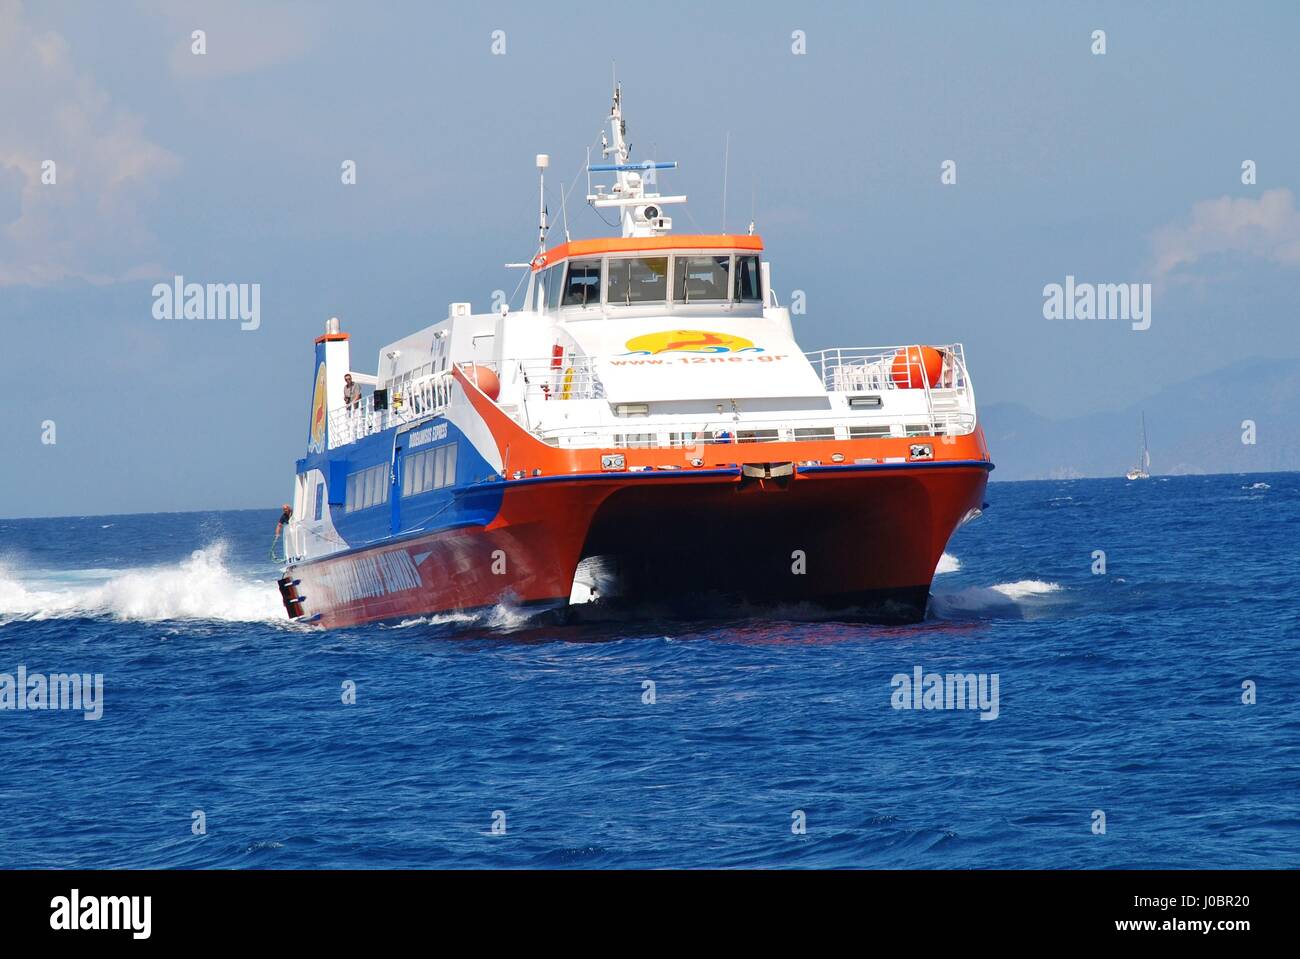 Nissiros High Resolution Stock Photography and Images - Alamy